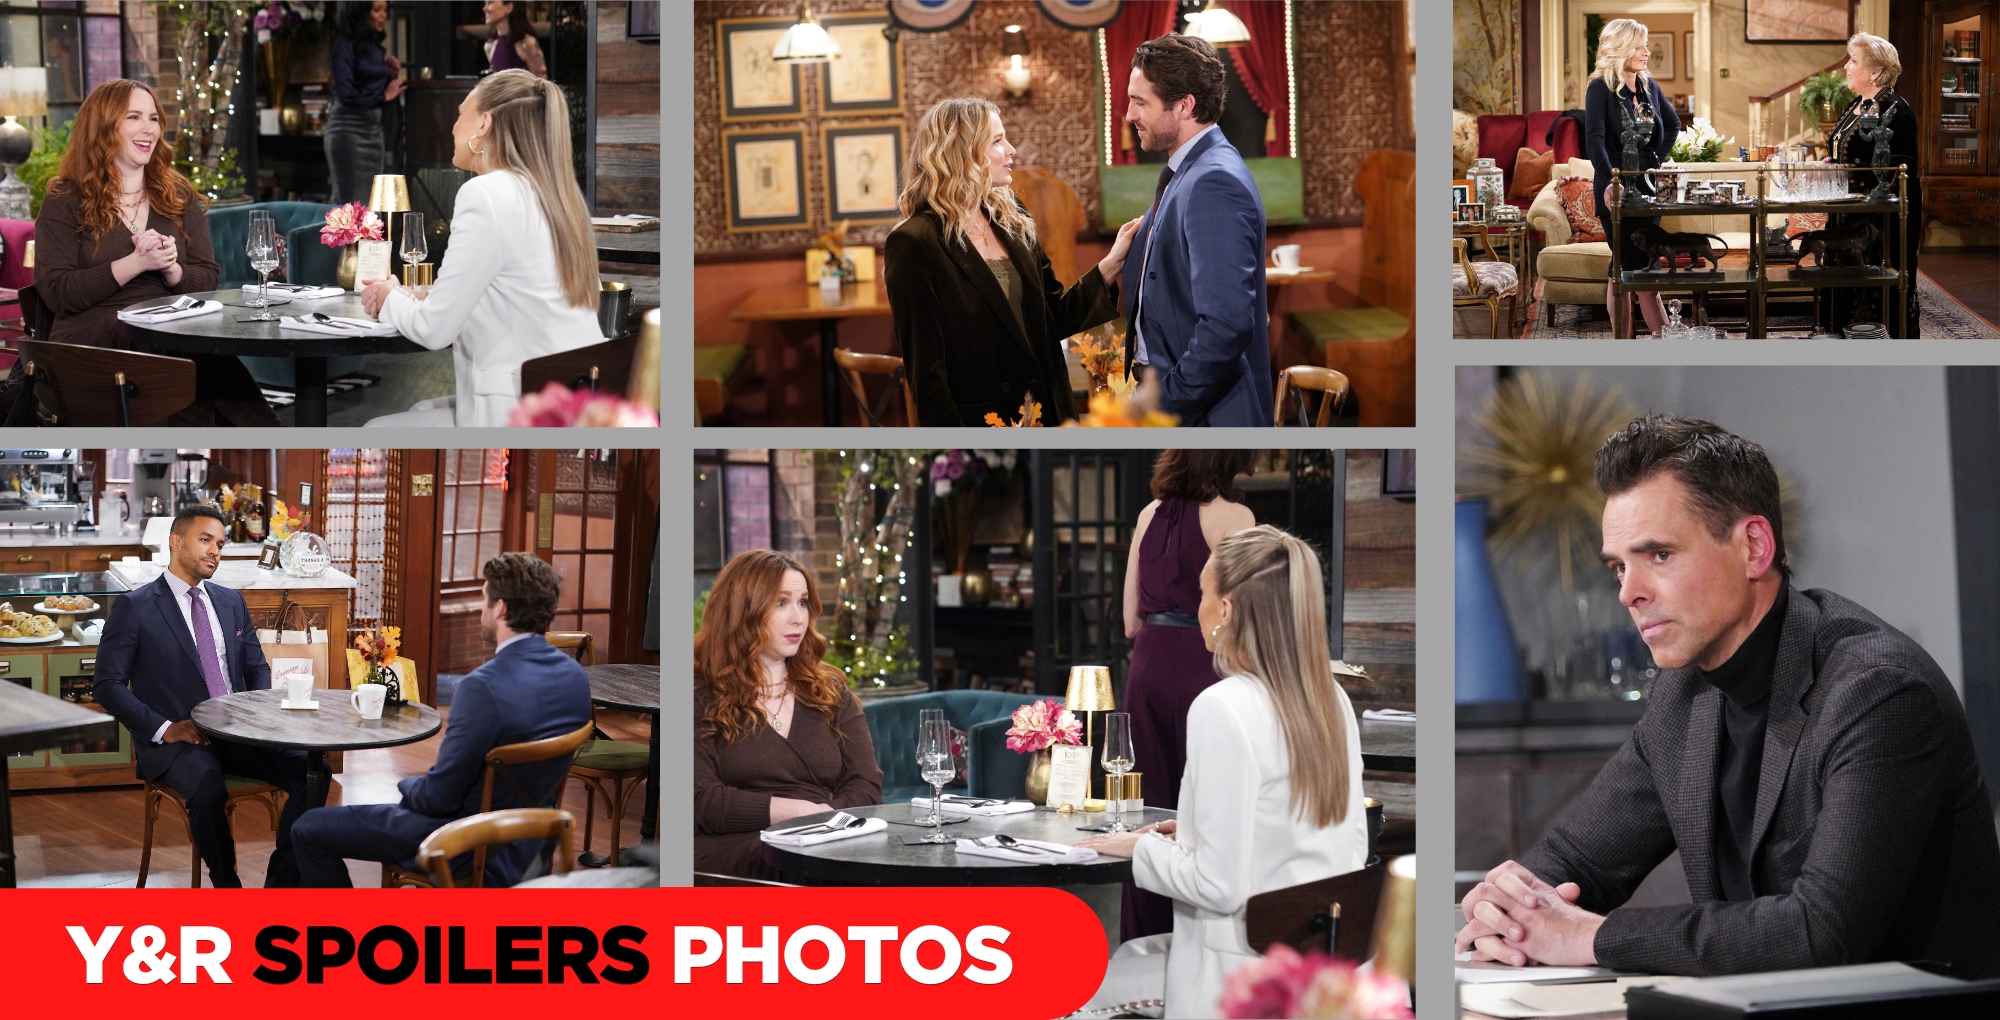 Y&R Preview Photos: Intense Discussions And Flirting